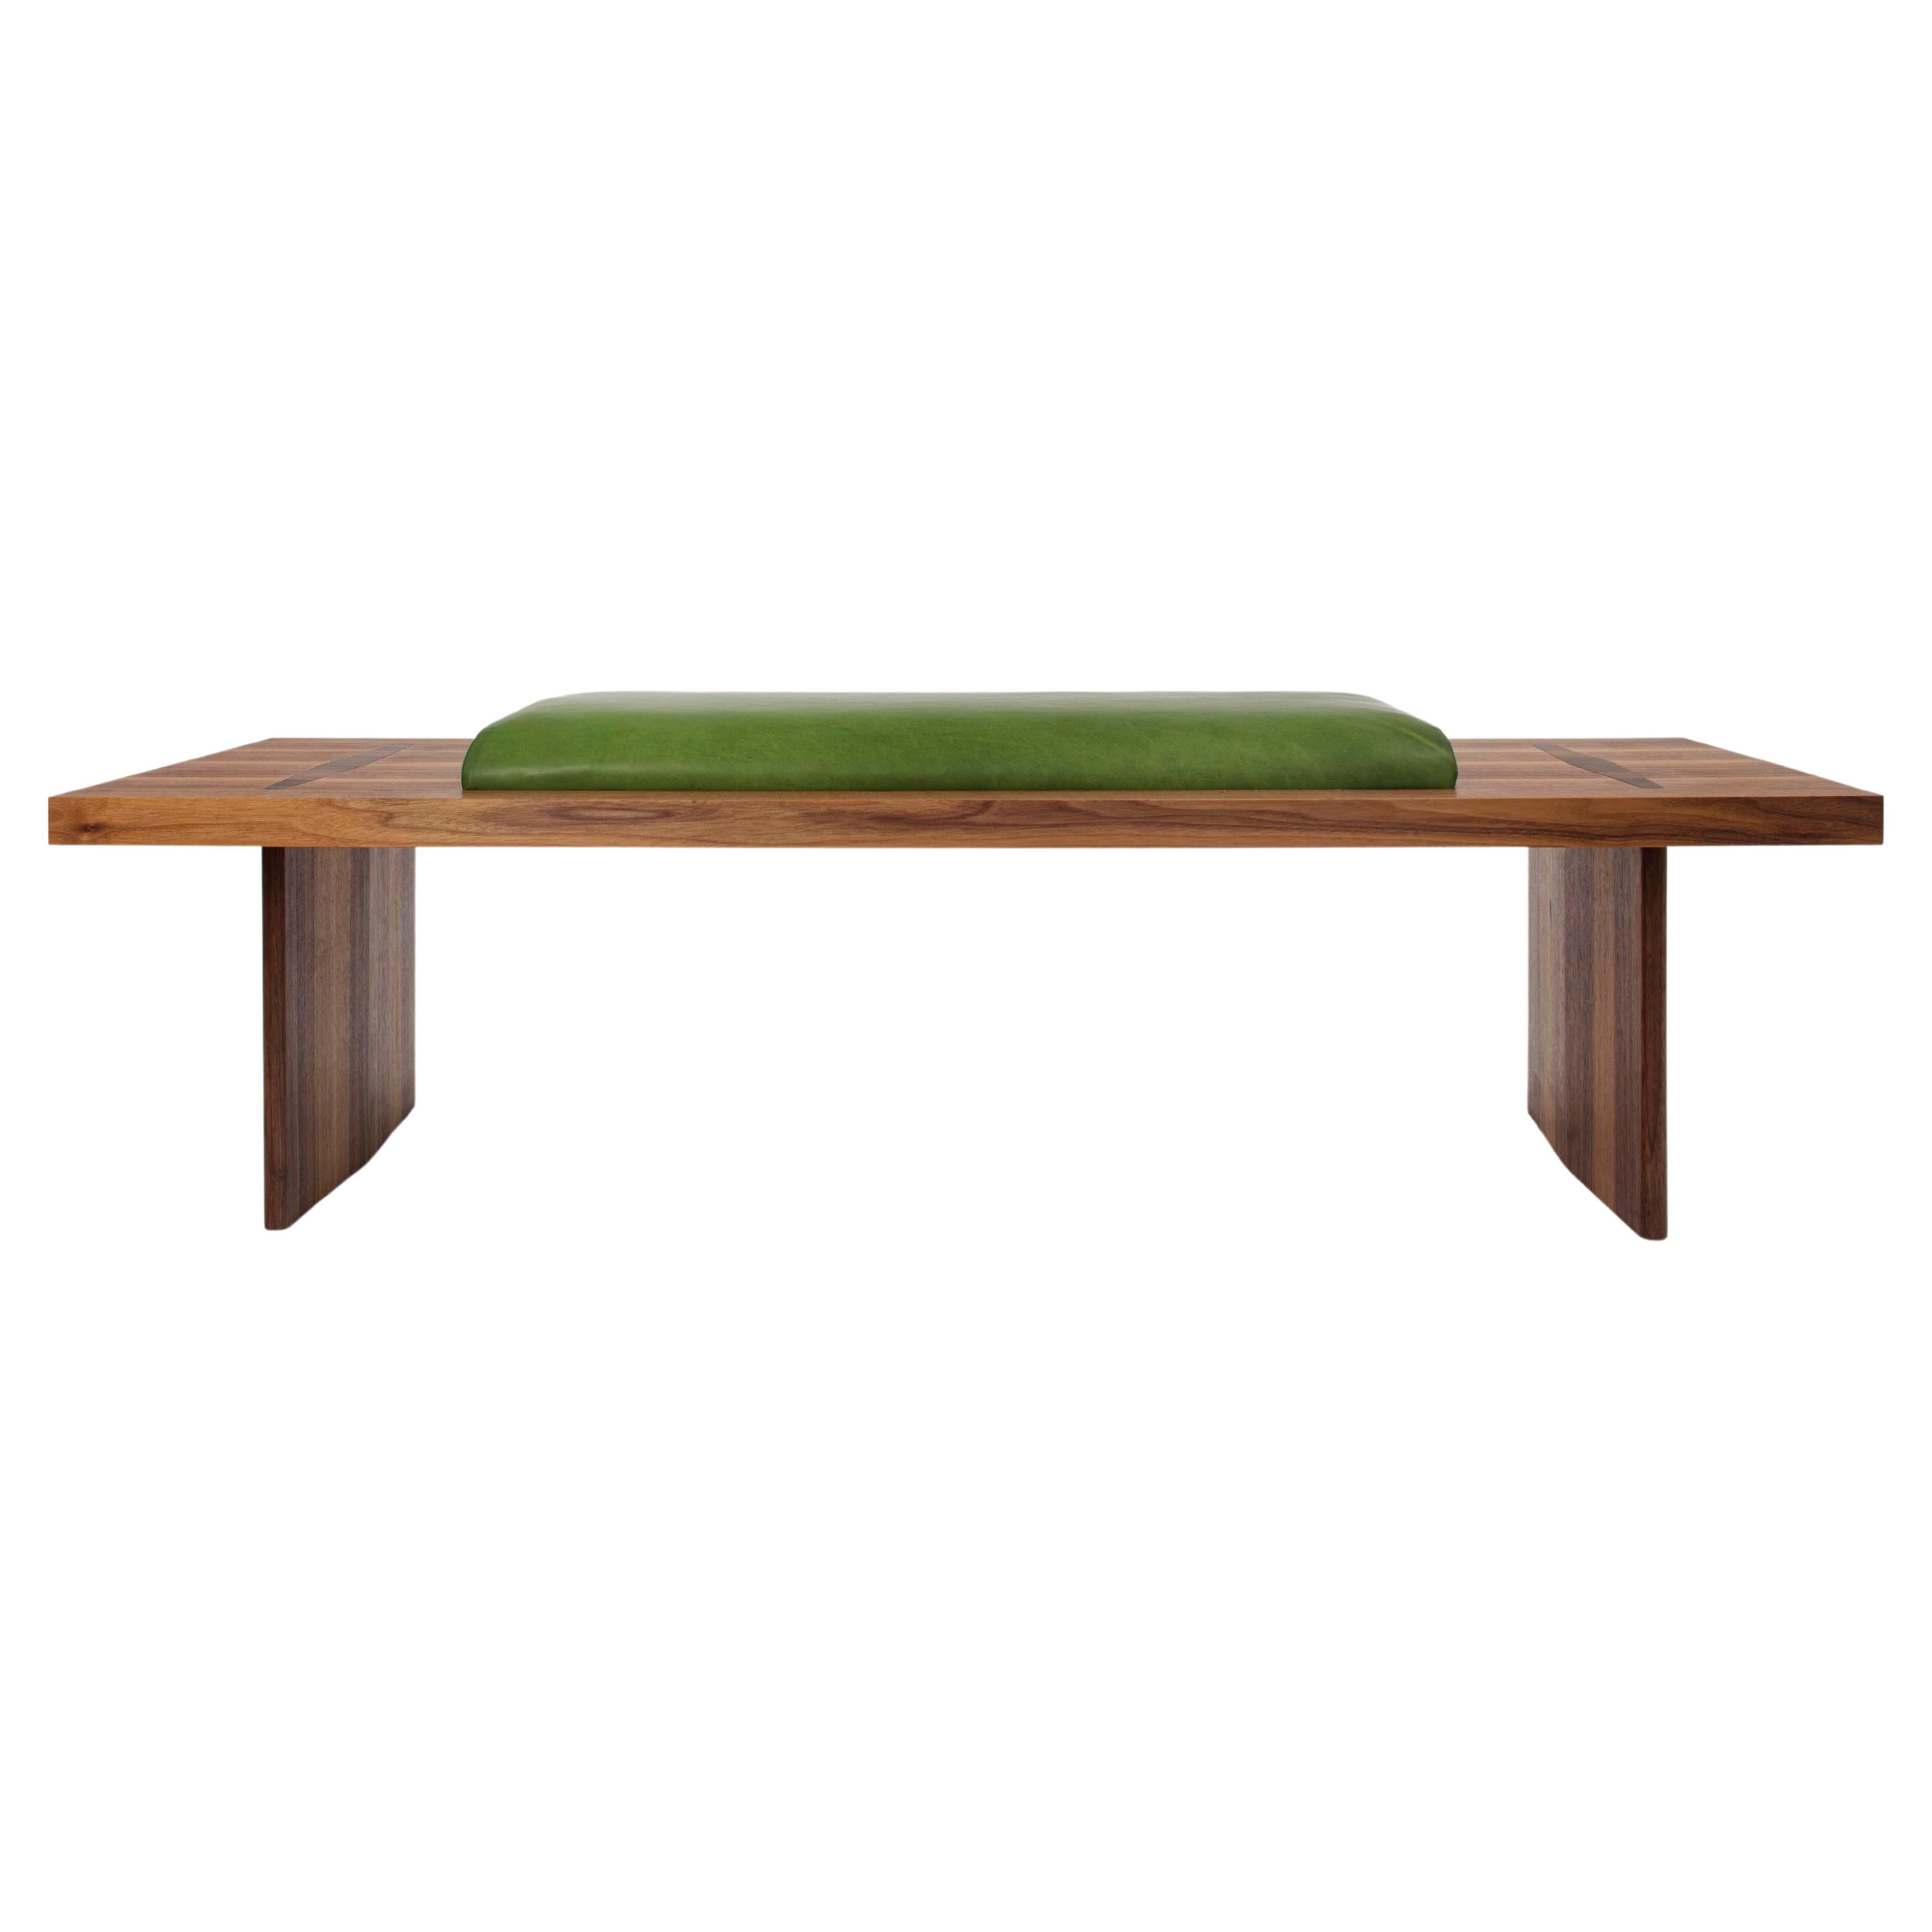 Architectural Bench Made of Walnut with Leather Upholstery by Studio BvdL